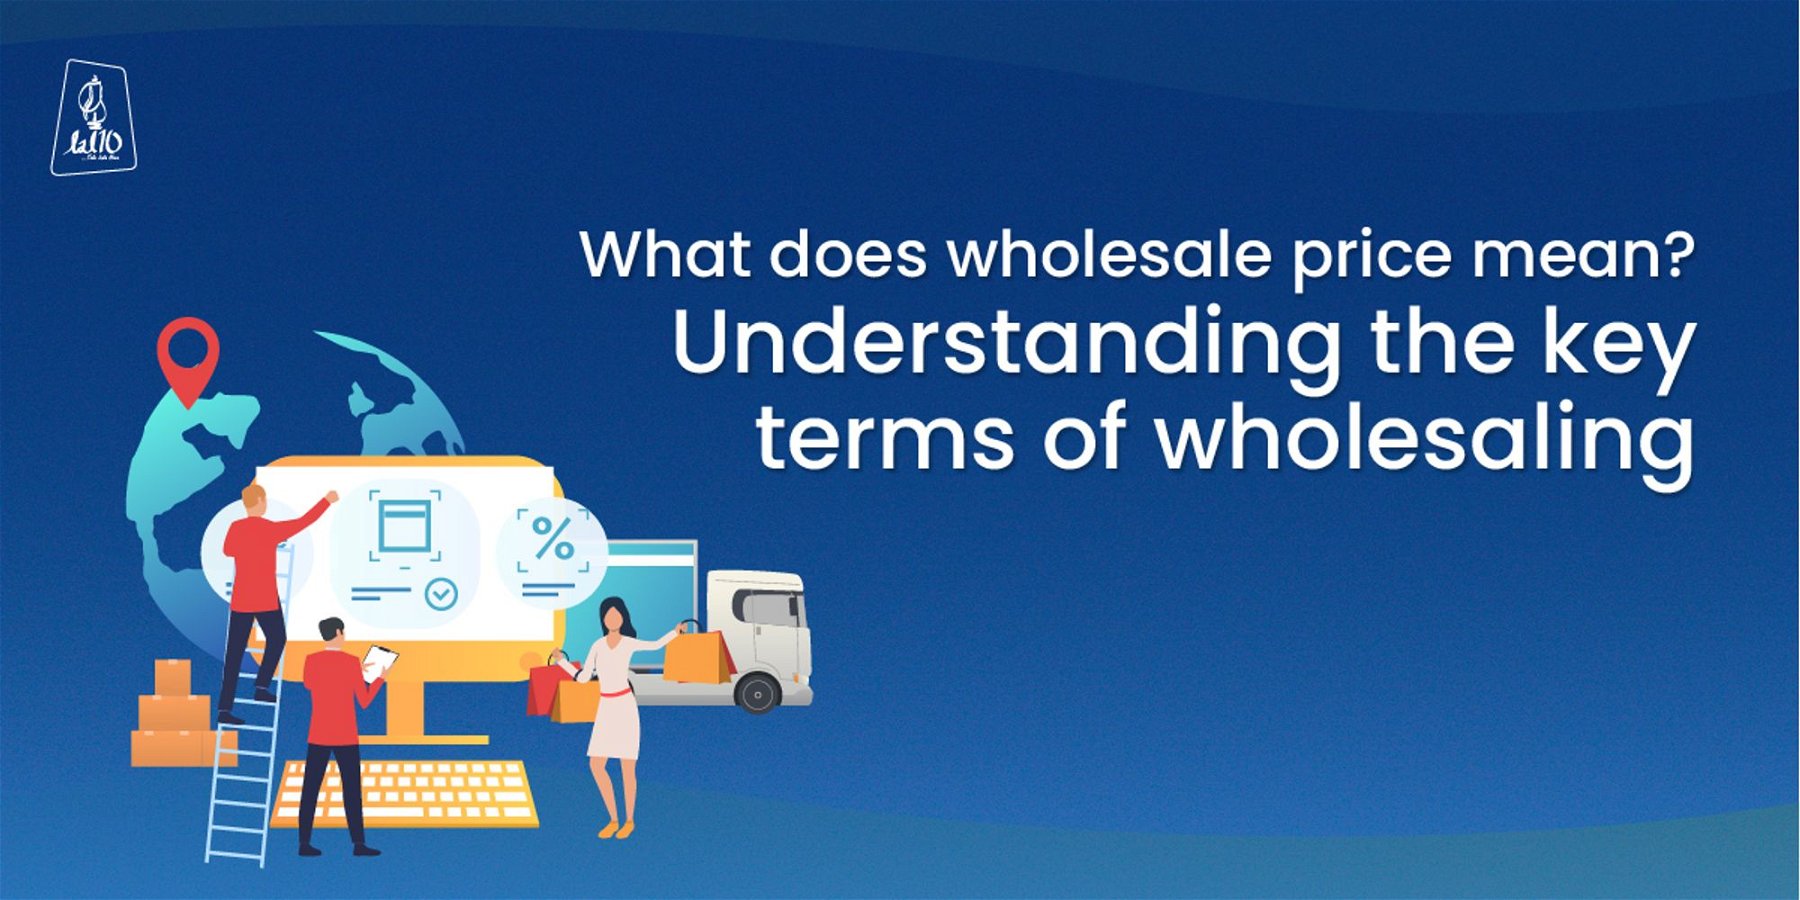 What does wholesale price mean? Understanding the key terms of wholesaling